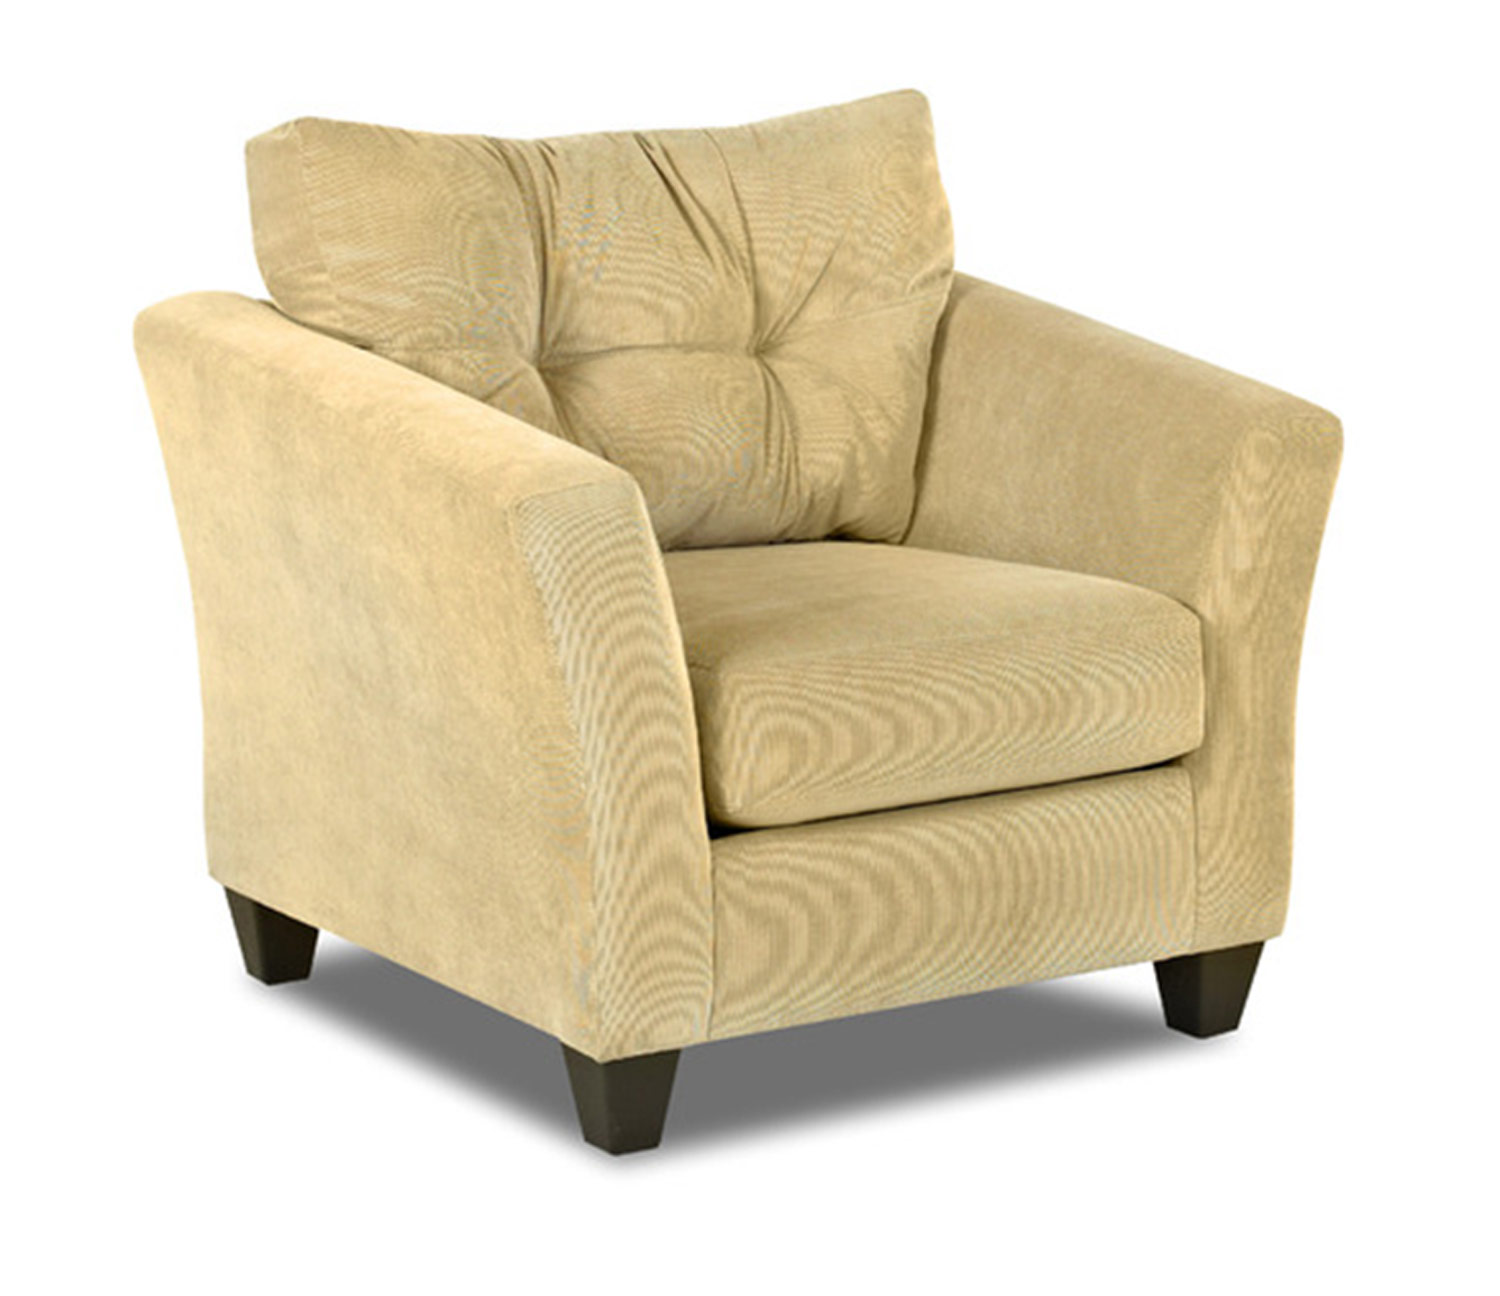 Klaussner Flair Chair - Pender Sand